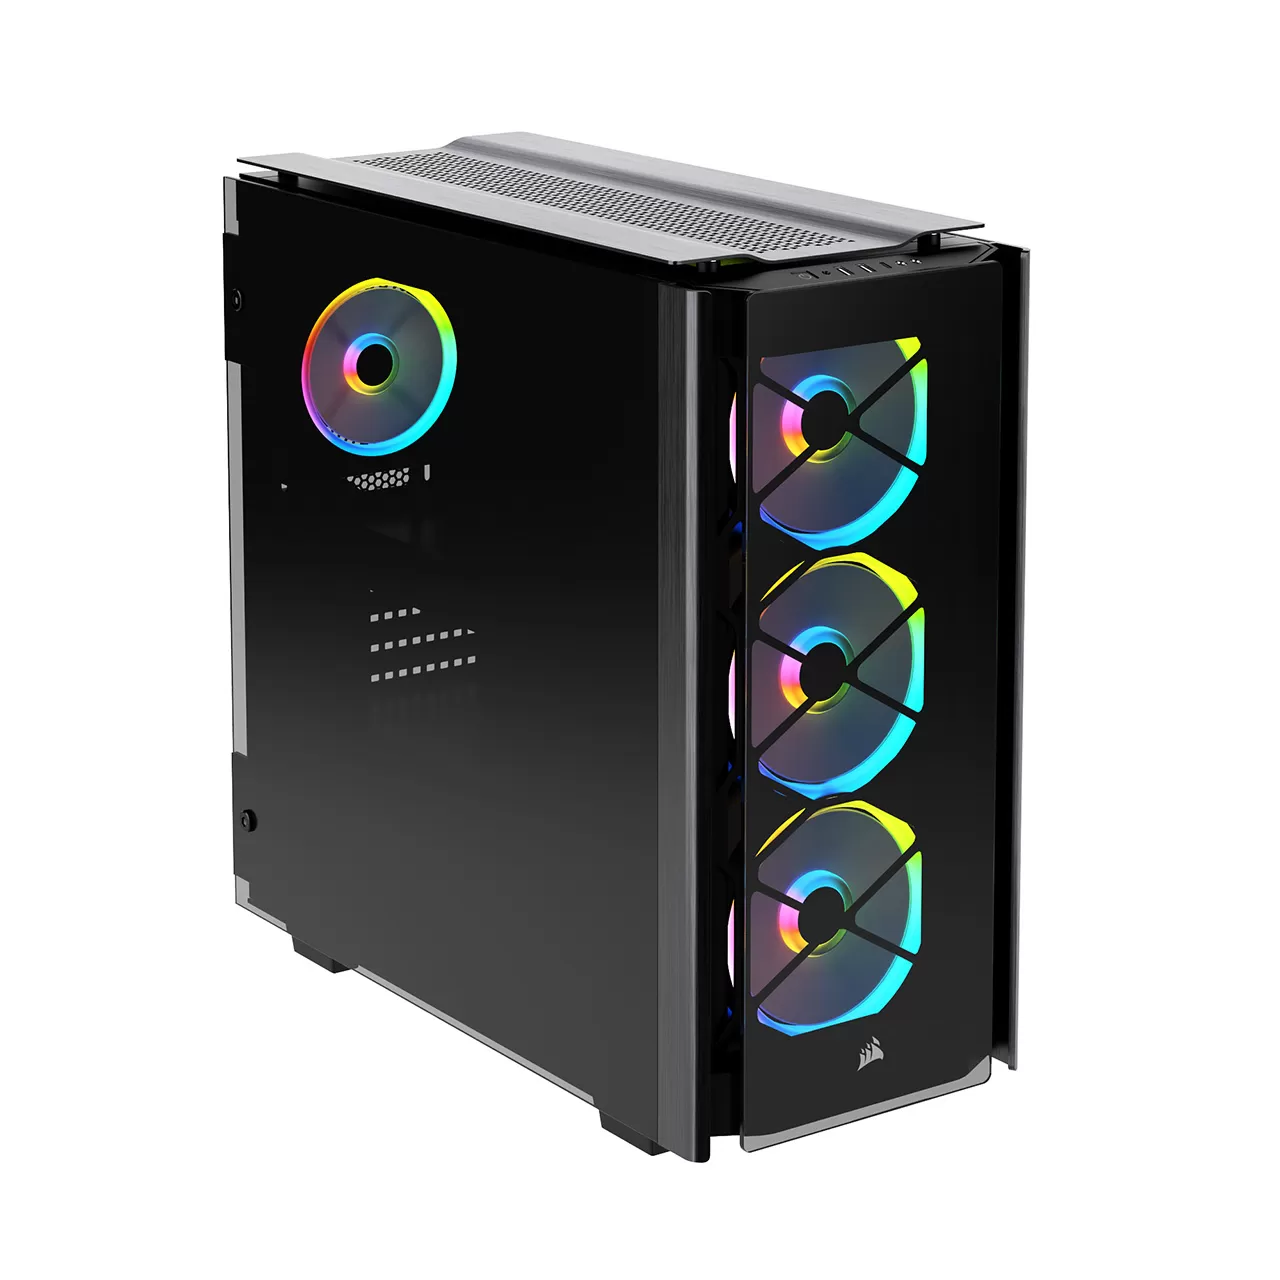 Products – obsidian-series-500d-rgb-se-pc-case-by-corsair